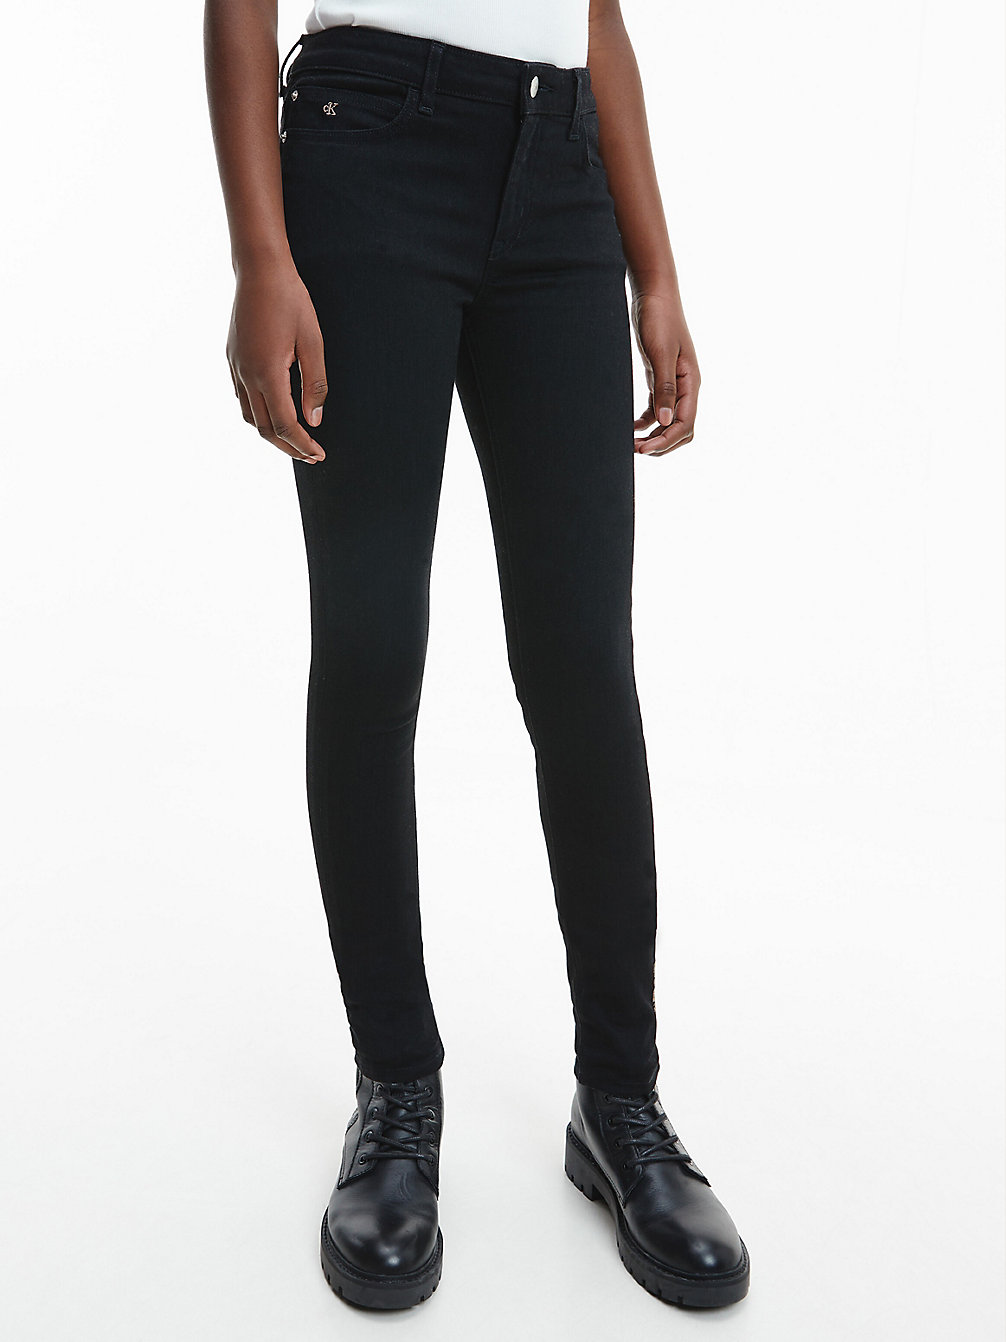 CLEAN BLACK STRETCH > Mid Rise Skinny Jeans > undefined girls - Calvin Klein